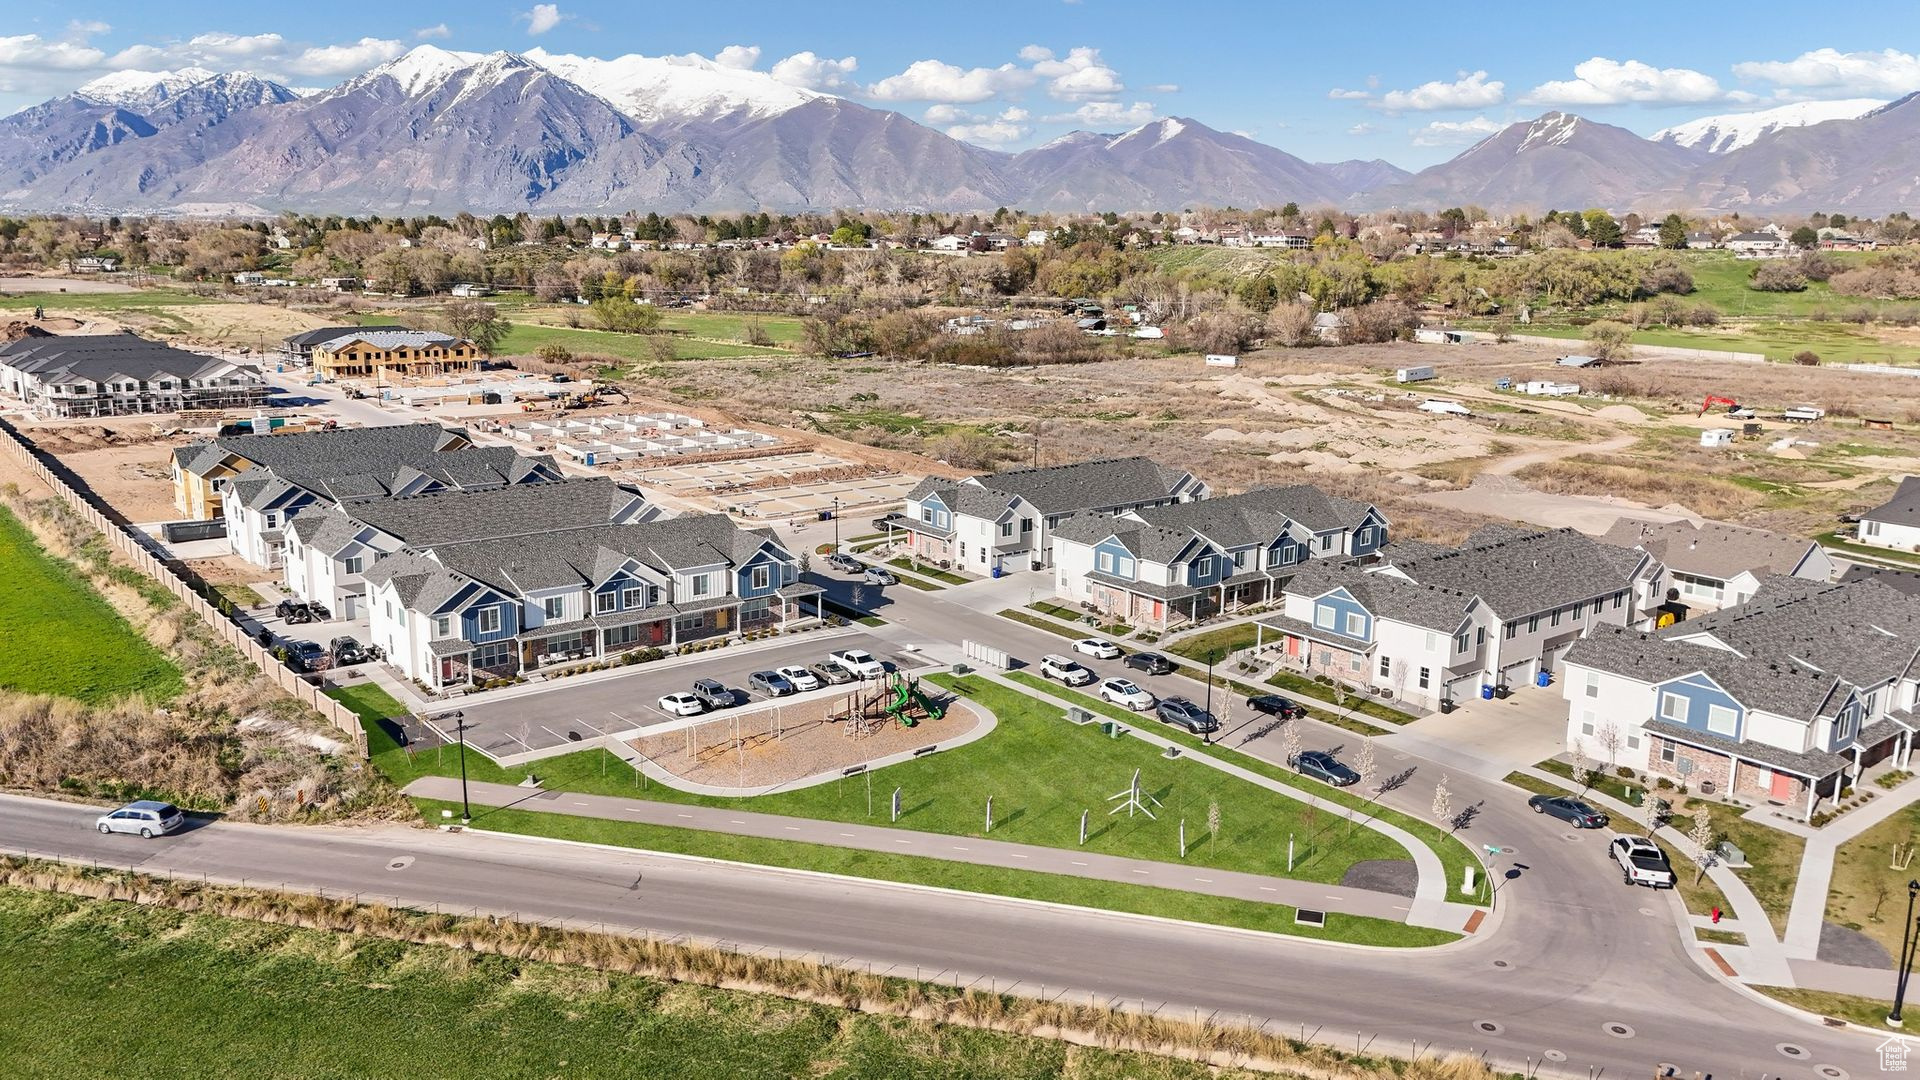 1132 S 200 E #41, Spanish Fork, Utah 84660, 3 Bedrooms Bedrooms, 11 Rooms Rooms,1 BathroomBathrooms,Residential,For sale,200,1992737